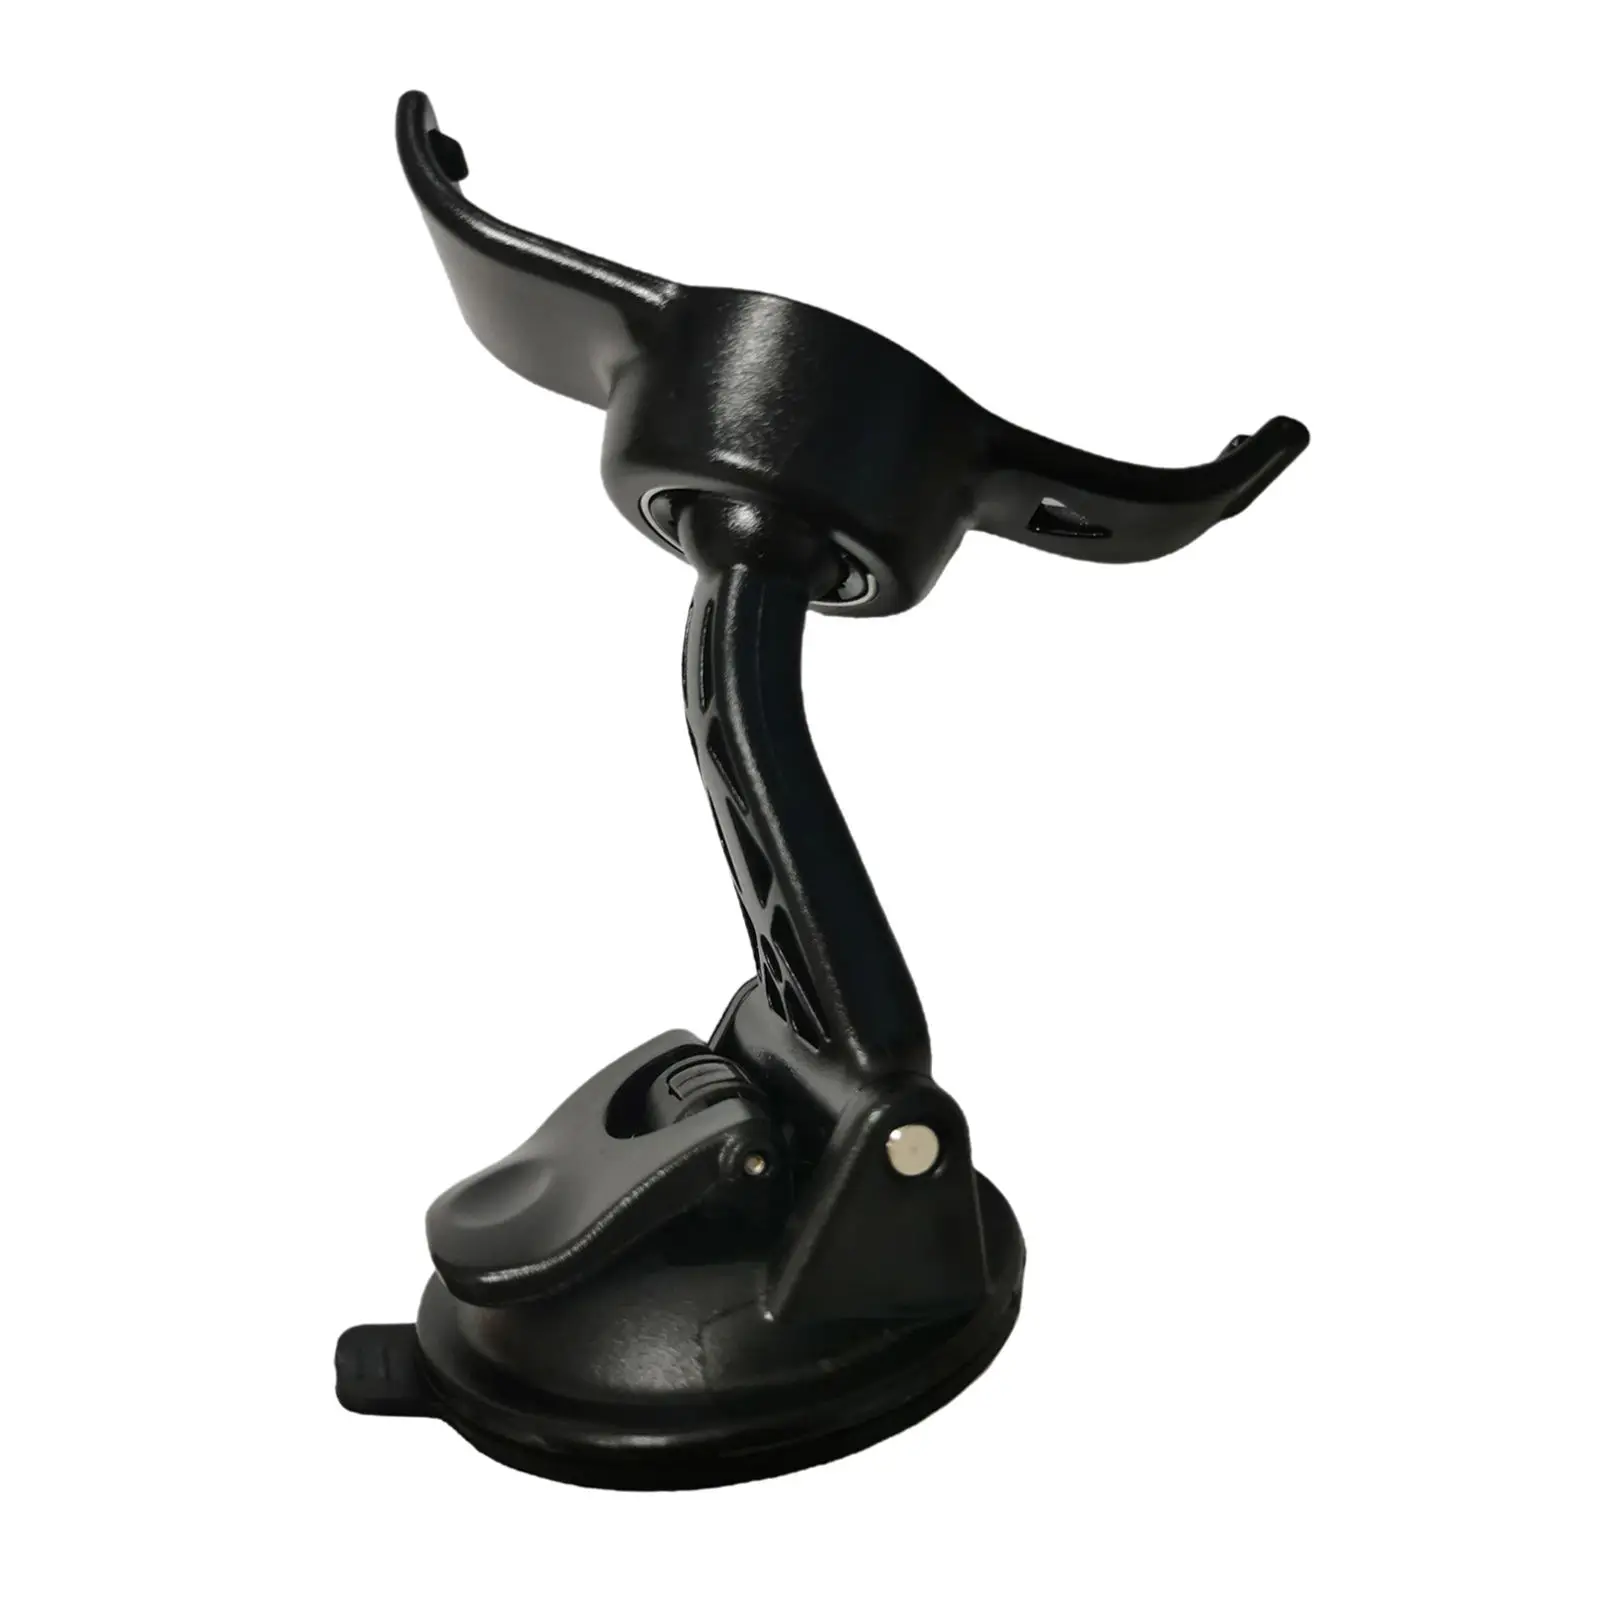 Car Windscreen Windshield Suction Cup Mount Holder For Garmin GPS Nuvi 40 40LM (Replacement for Garmin 010-11765-01)